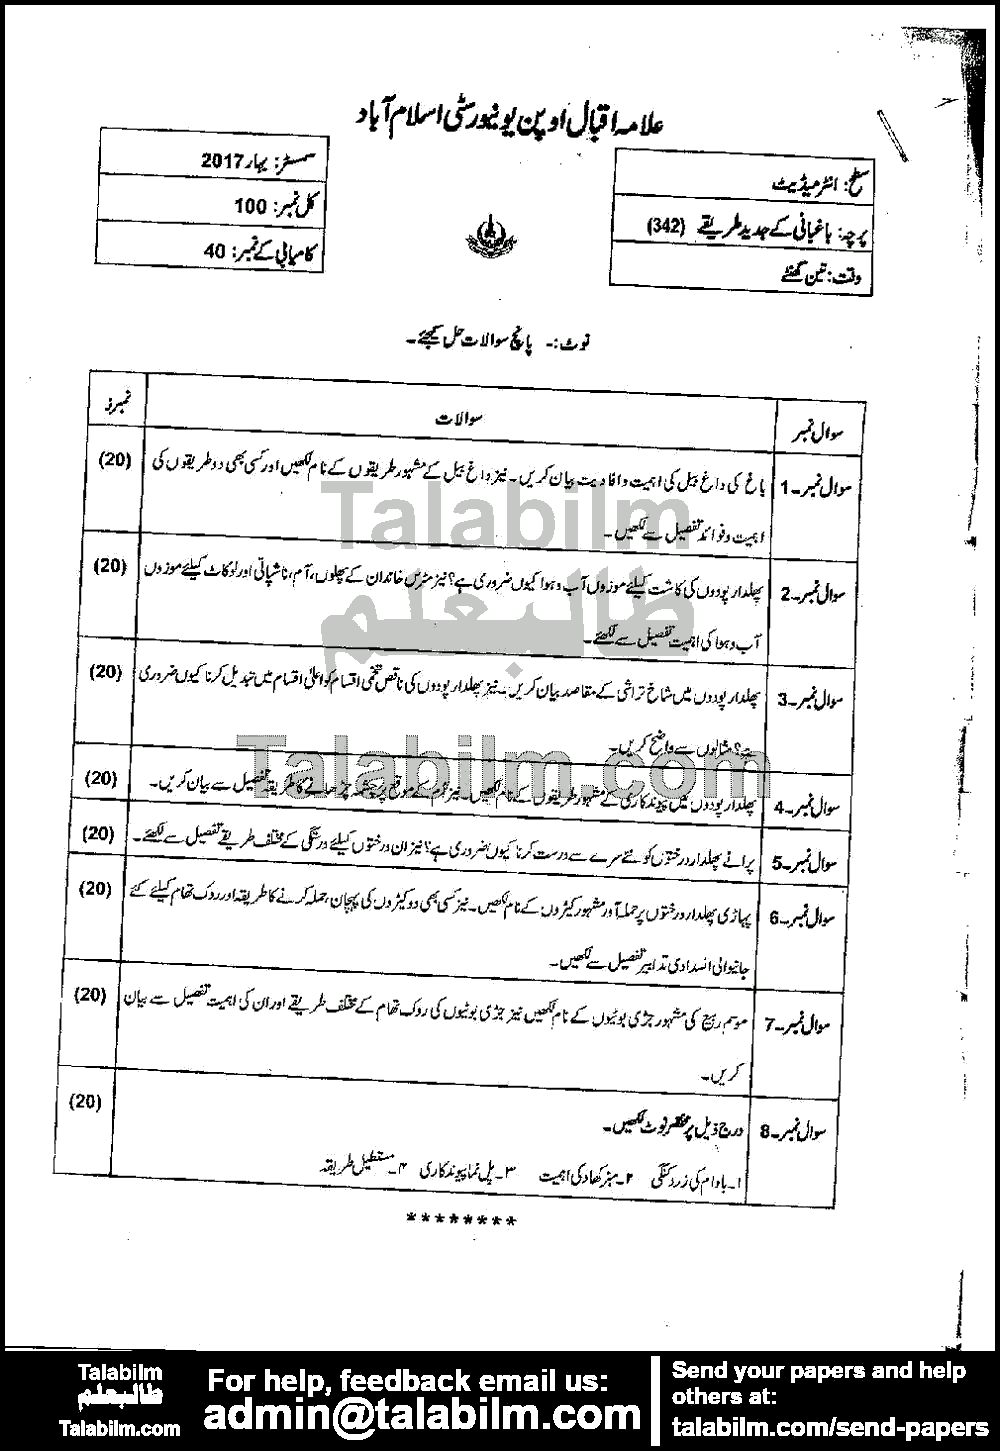 Baghbani Ky Amli Tareeqy 342 past paper for Spring 2017